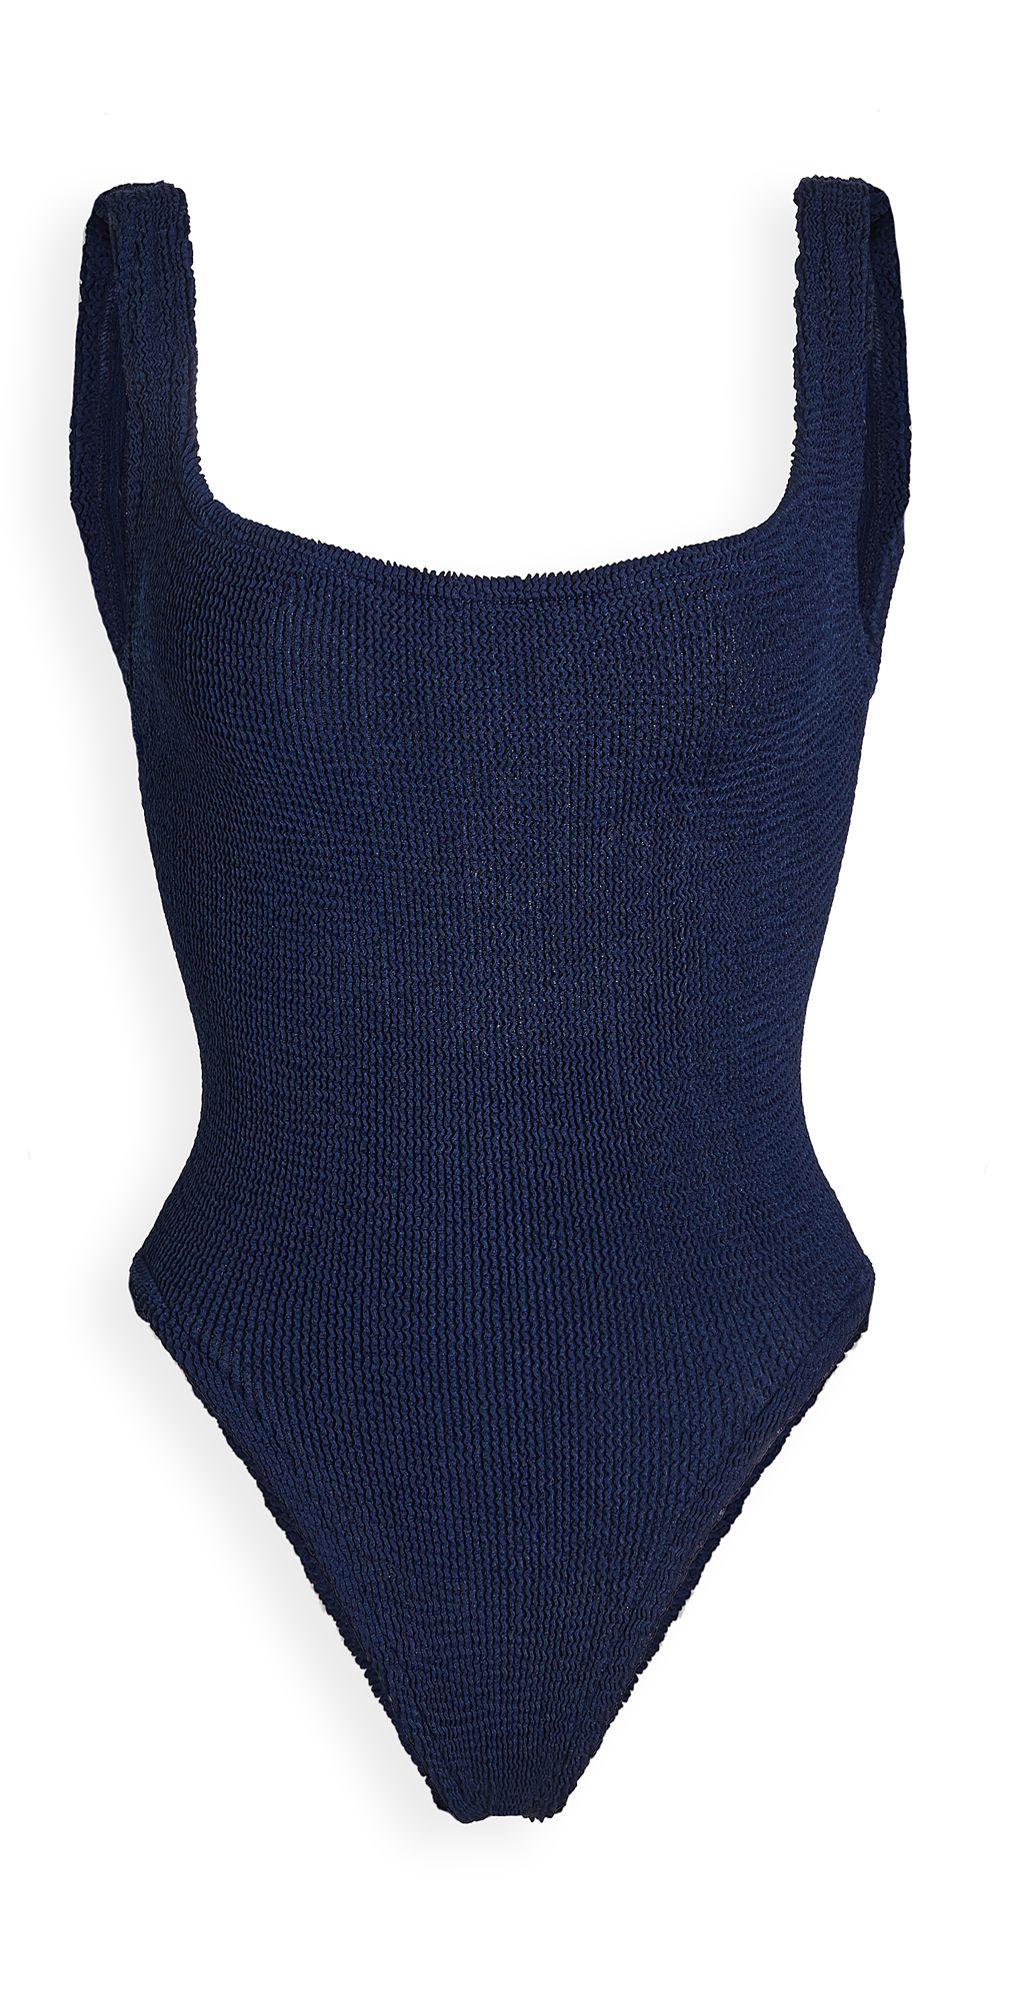 Hunza G Classic Square One Piece Swimsuit | Shopbop